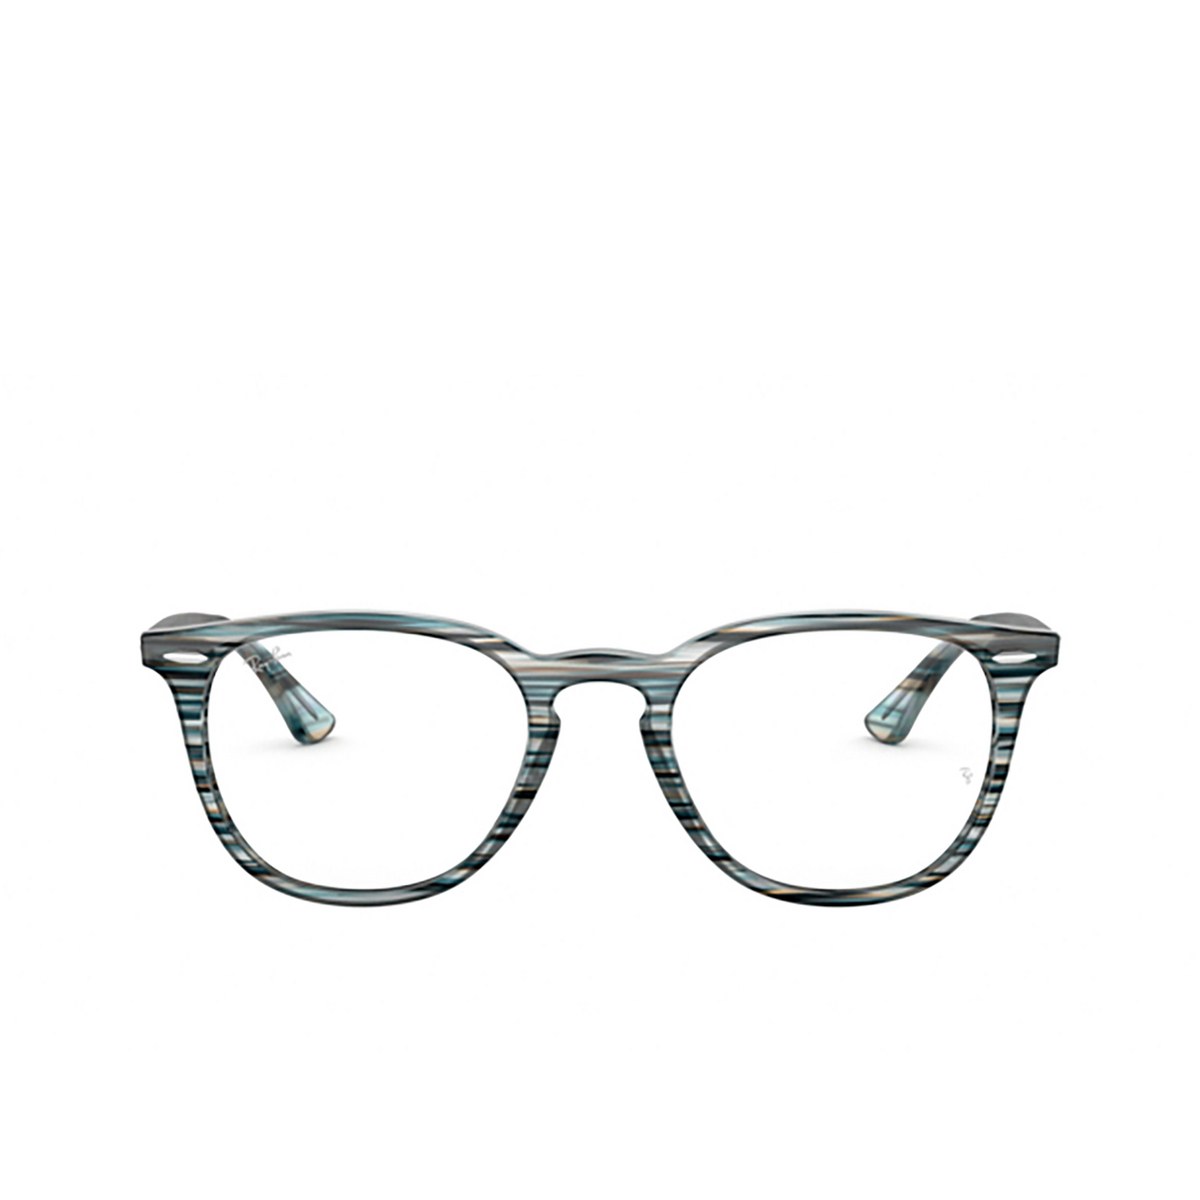 Ray-Ban RX7159 Eyeglasses 5750 Blue Grey Stripped - front view